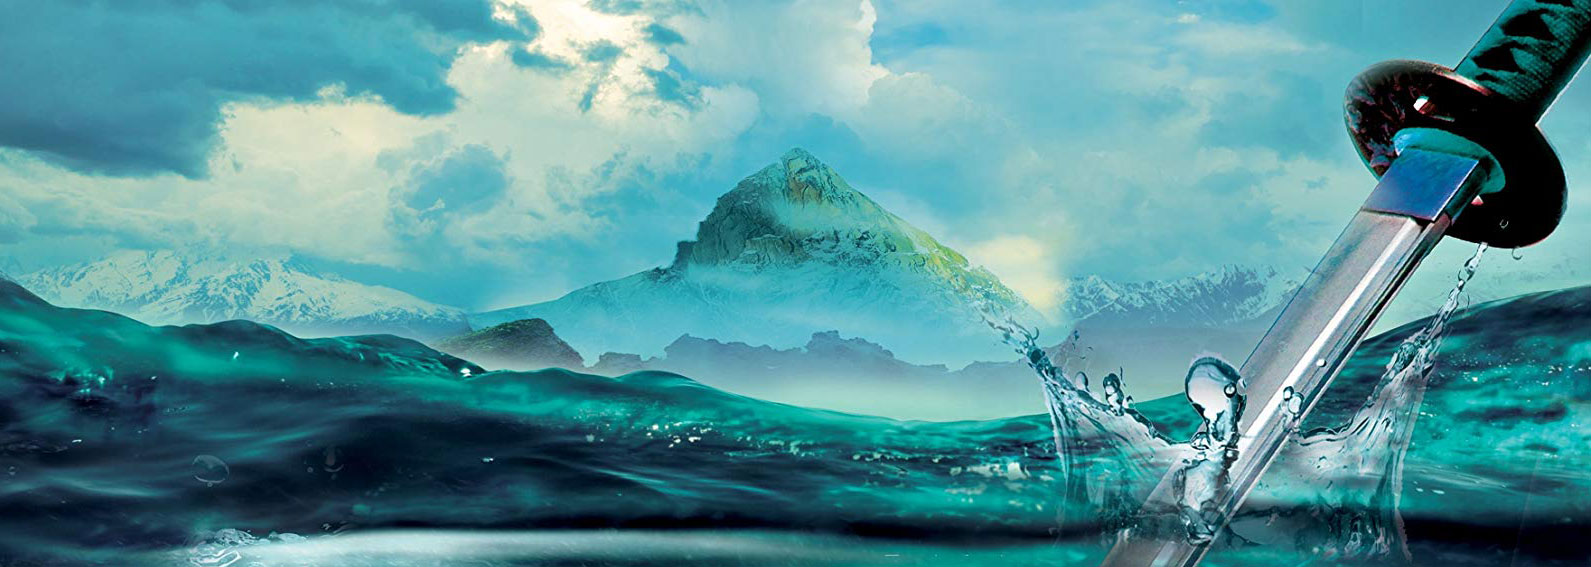 A sword plunging into clear water, with a massive mountain in the background.